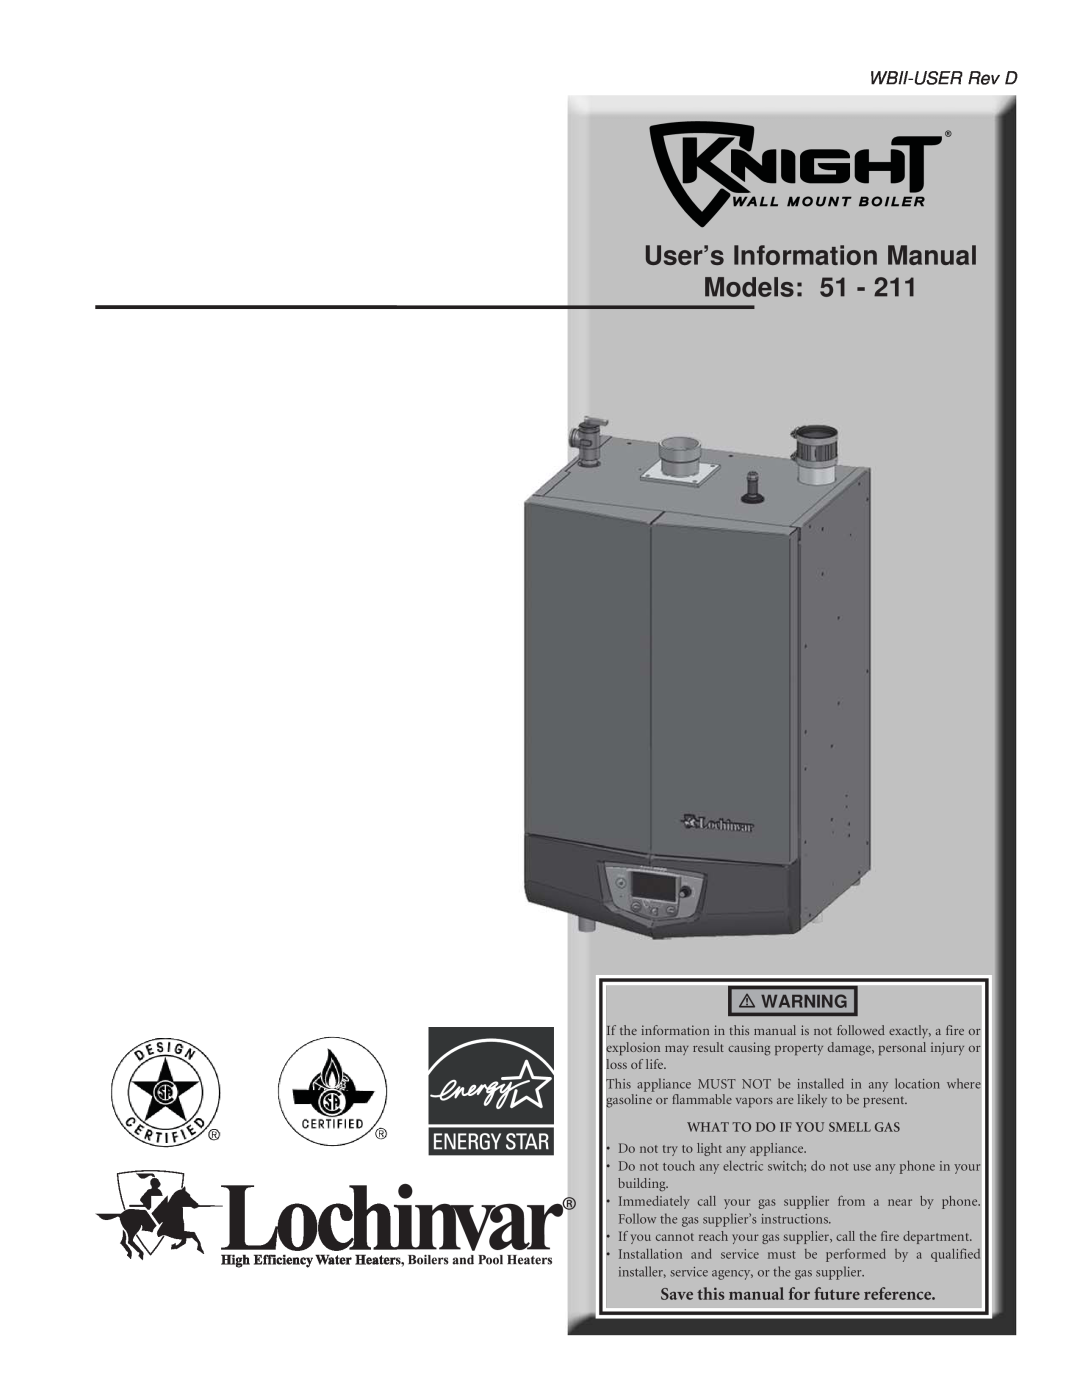 Lochinvar 51 - 211 manual WBII-USERRev D, Save this manual for future reference, User’s Information Manual Models 